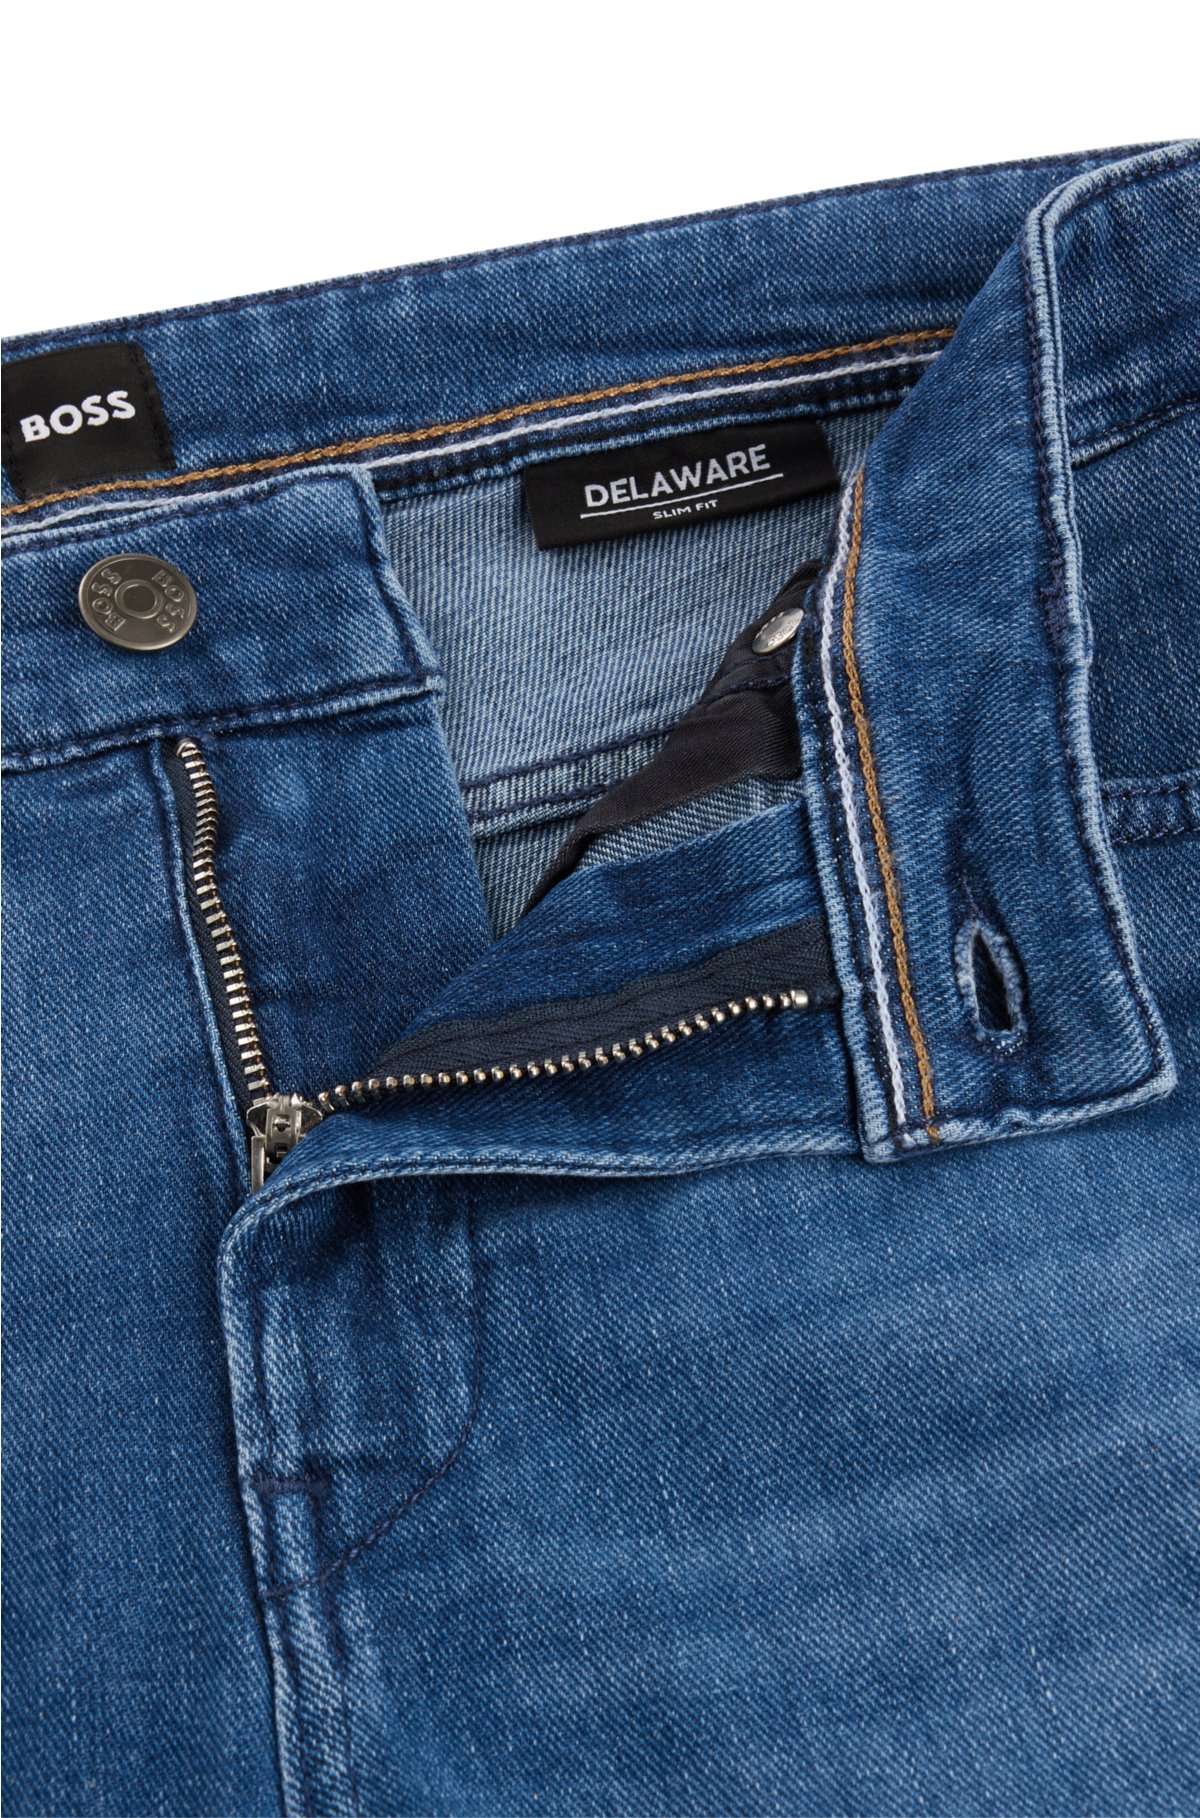 BOSS - Slim-fit jeans cashmere-touch denim